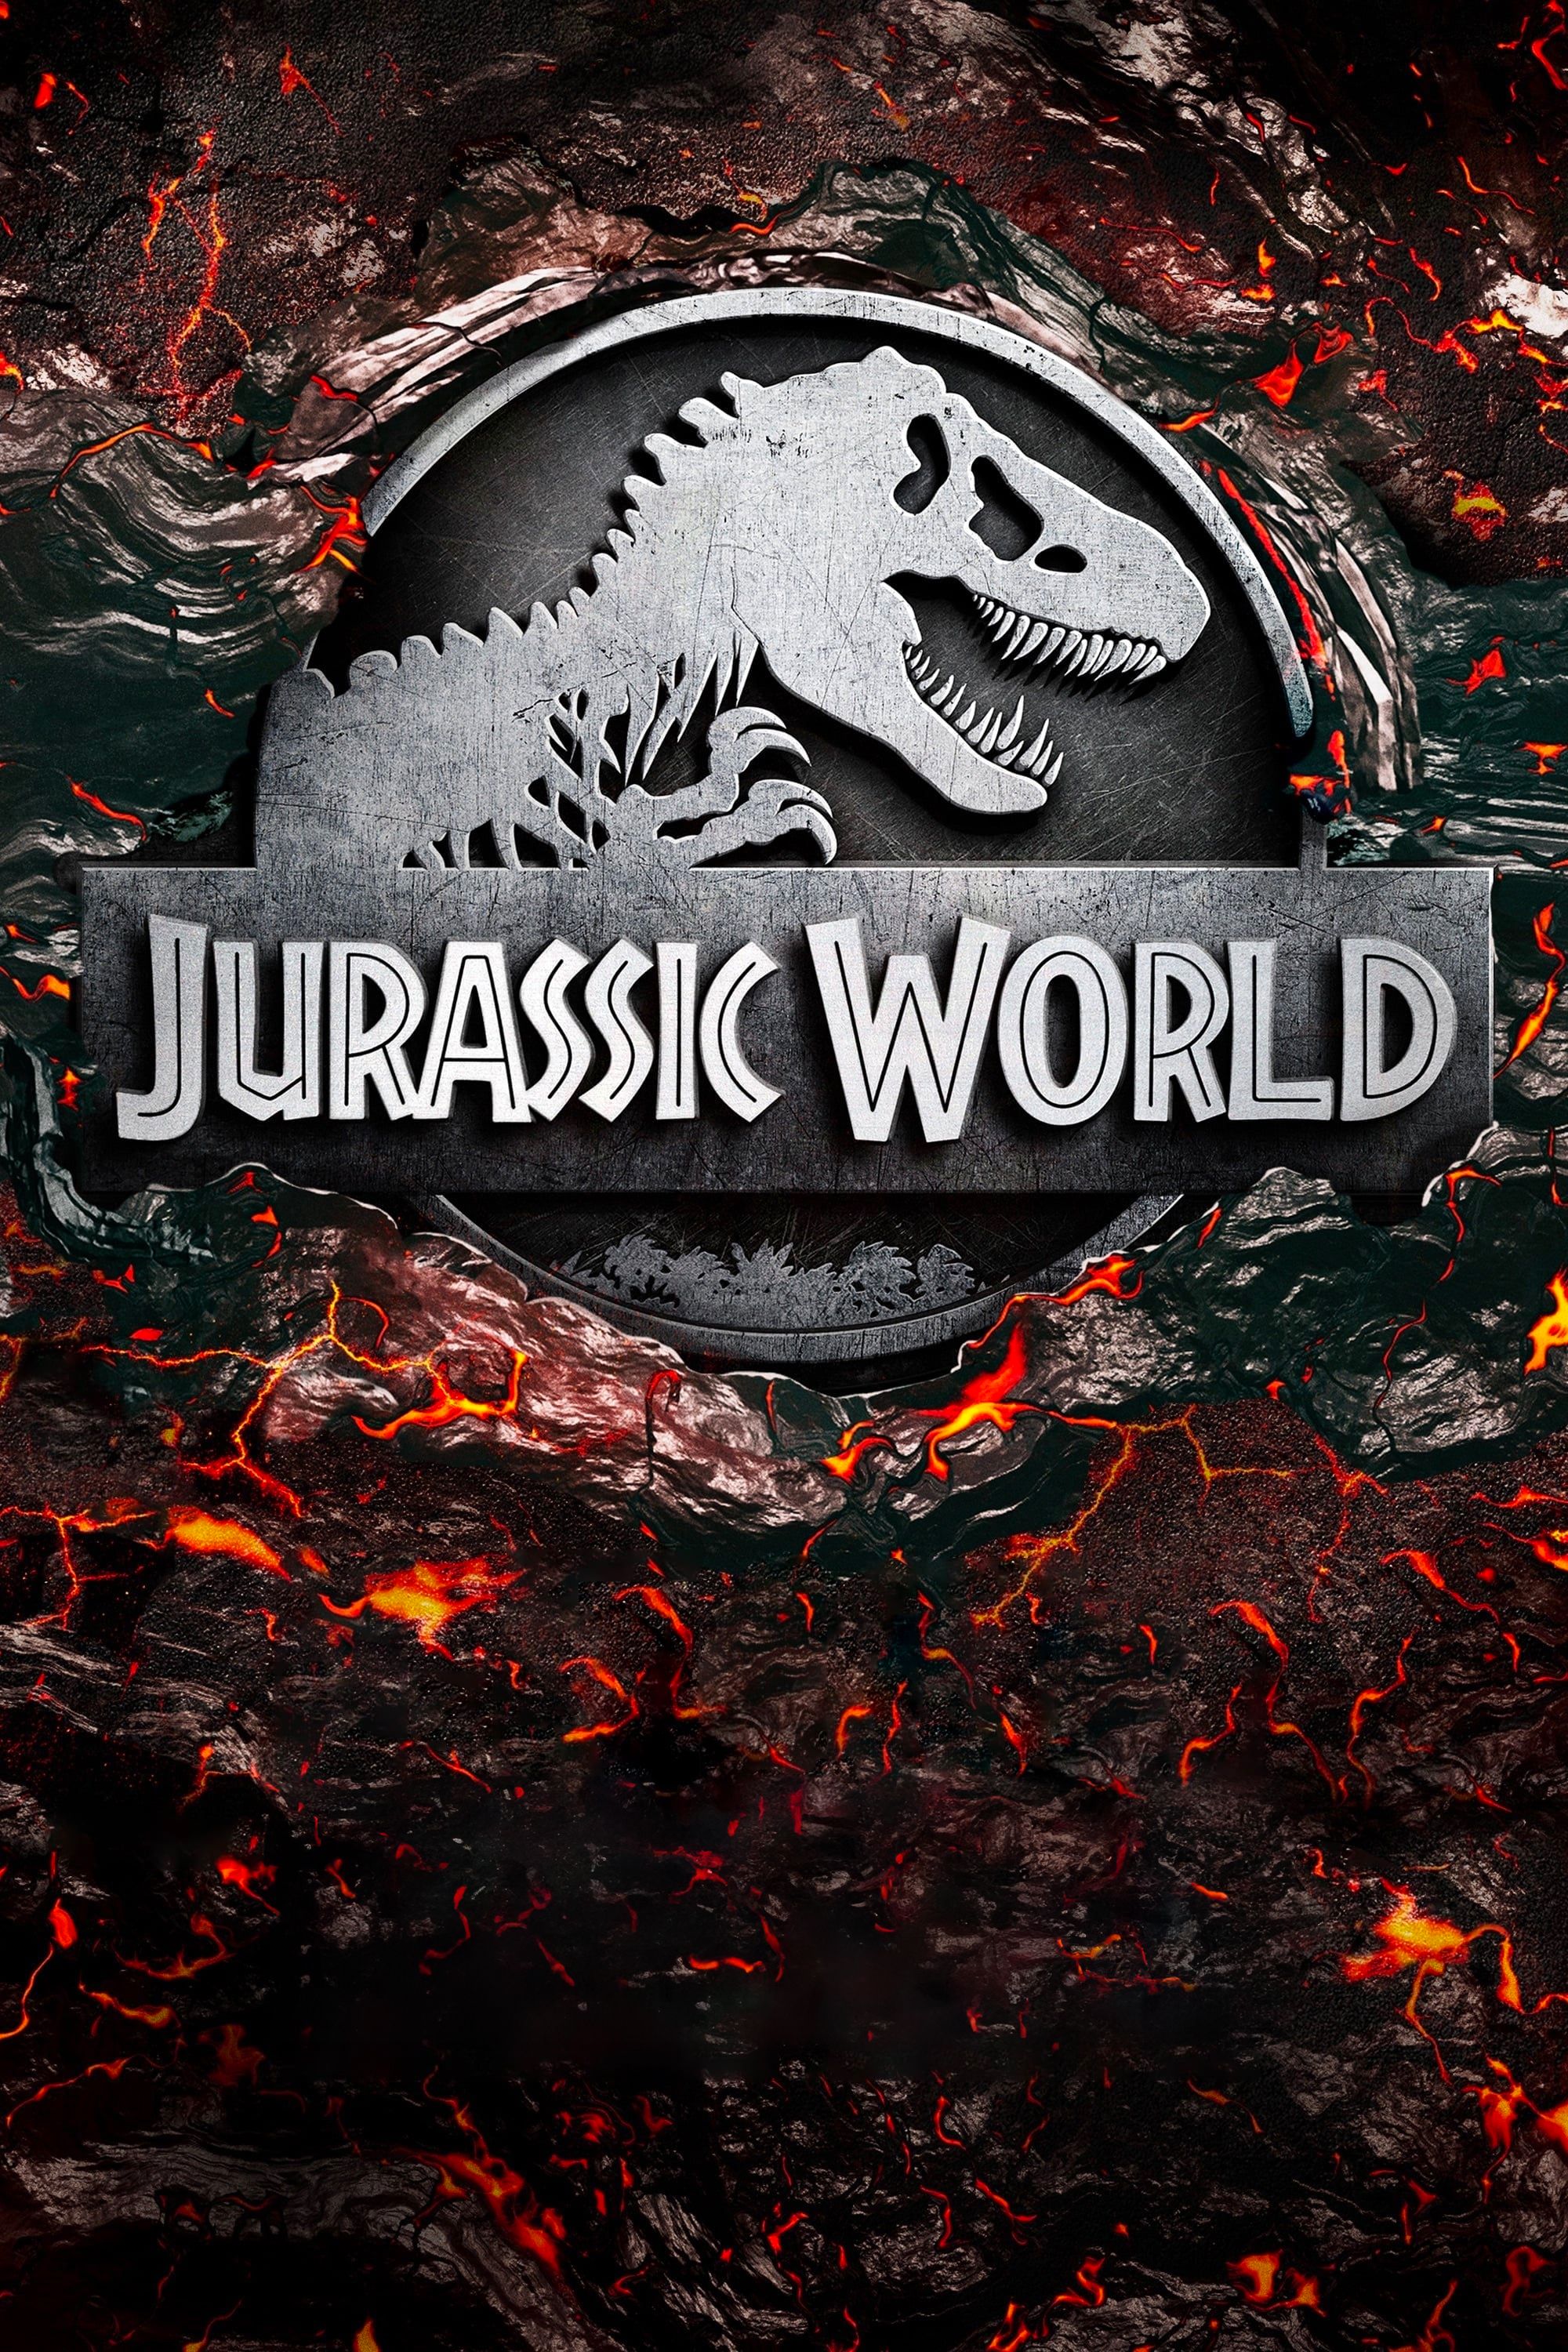 Jurassic World 4 Gets Back On Track With Rogue One Director